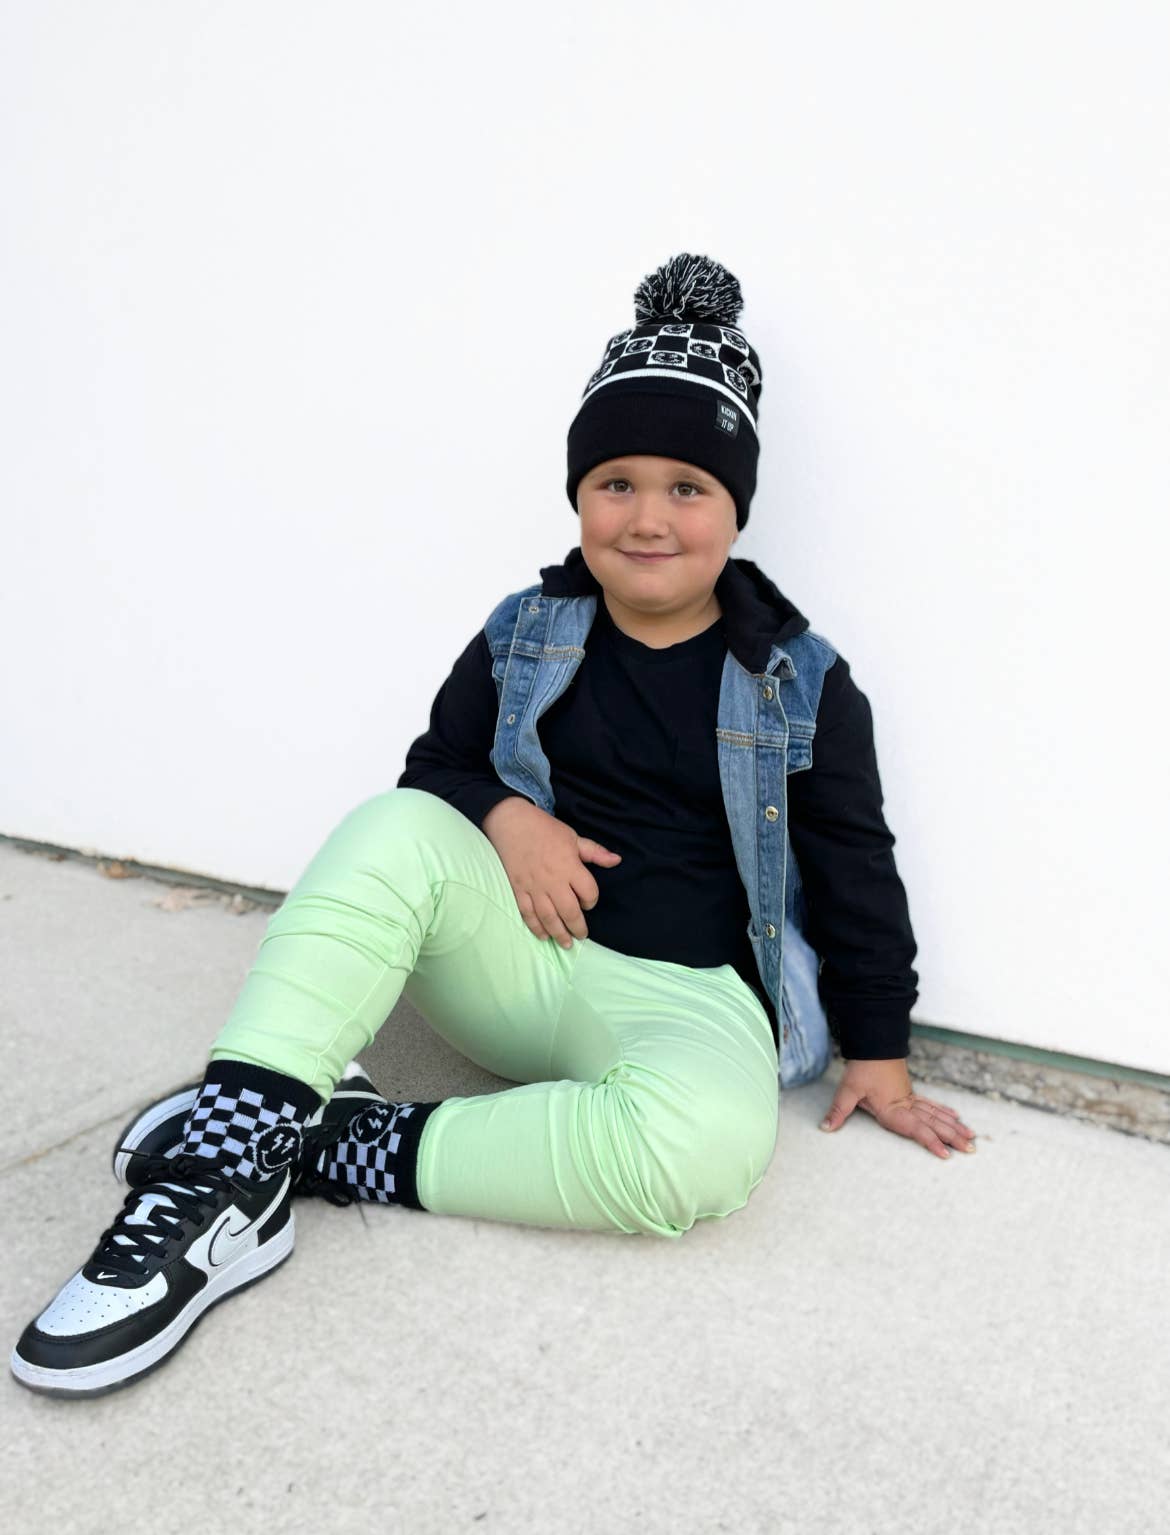 Black Smiley Check Beanie: Youth/Small Adult- 5 Years and Up